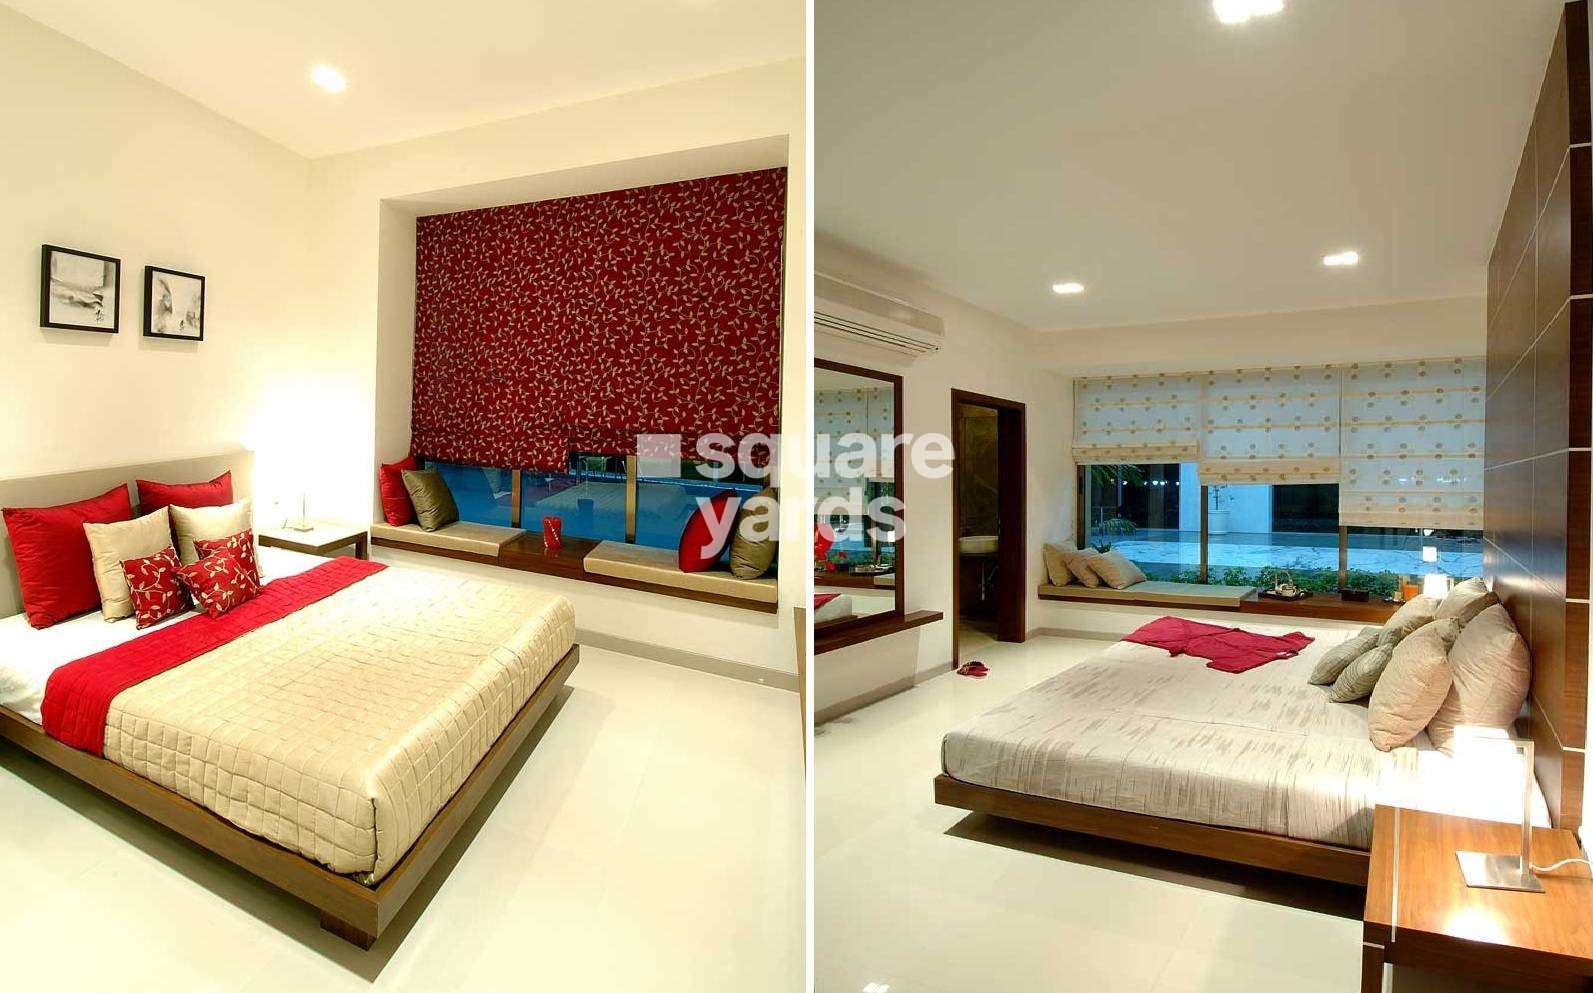 oberoi springs project apartment interiors1